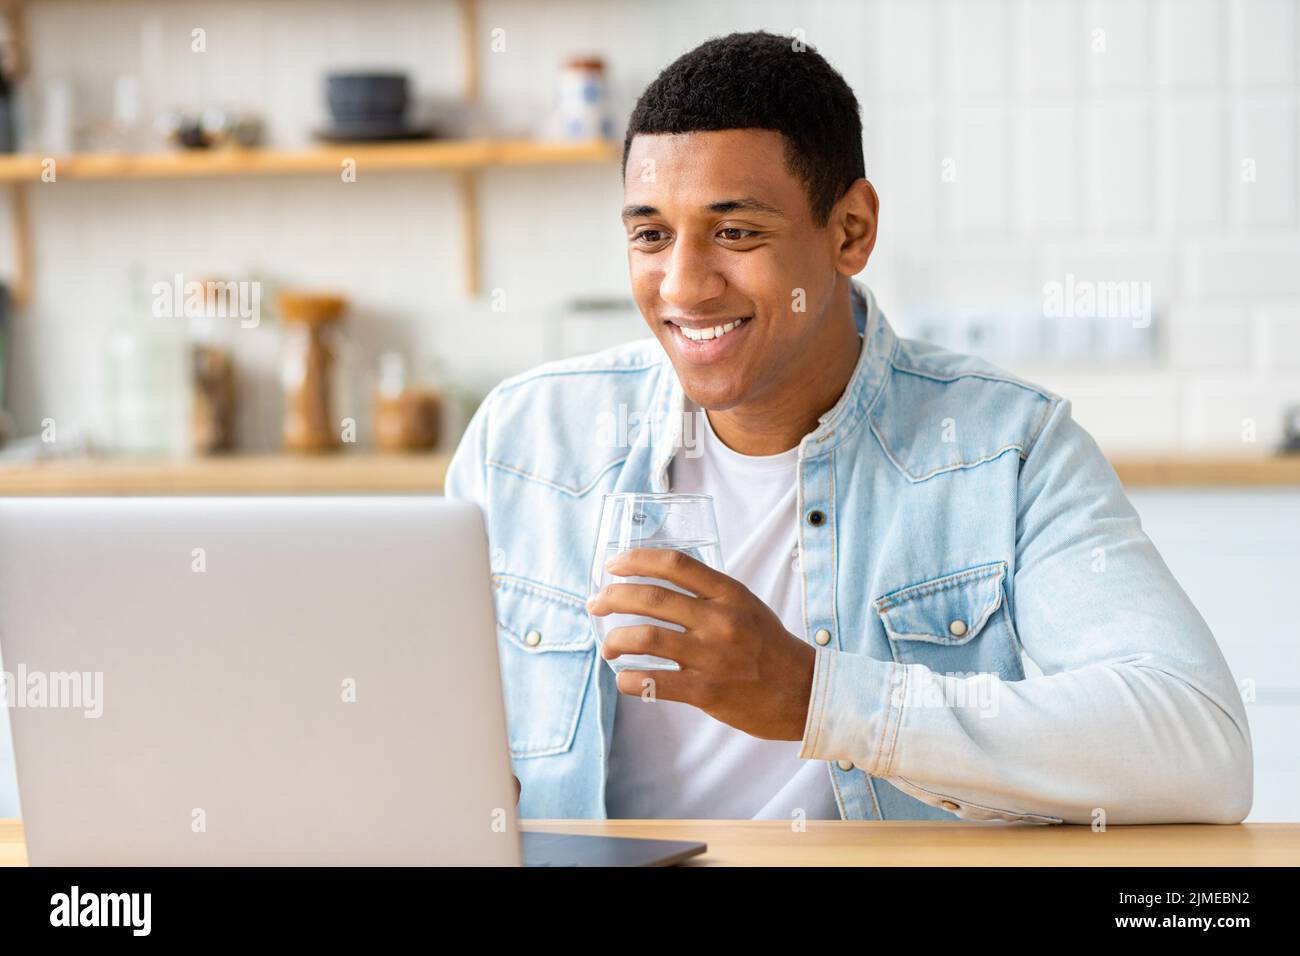 Young male student or freelancer uses laptop for online education or work Happy African American man working Stock Photo